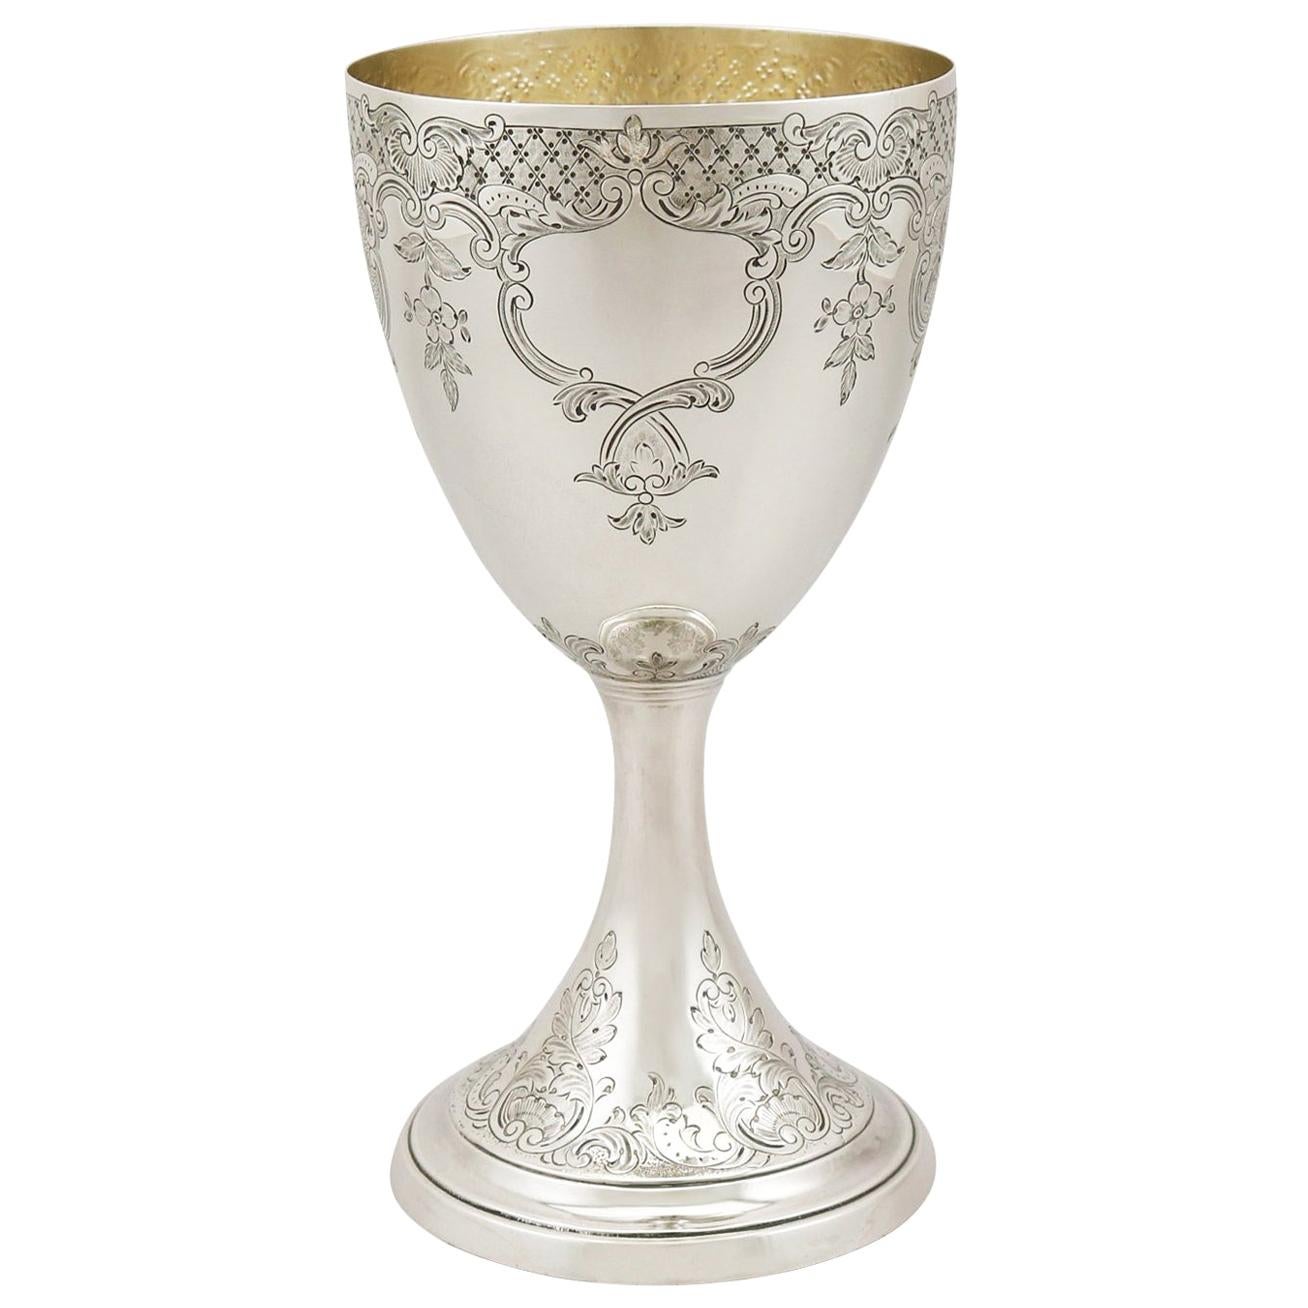 Antique English Sterling Silver Goblet by Thomas Watson & Co